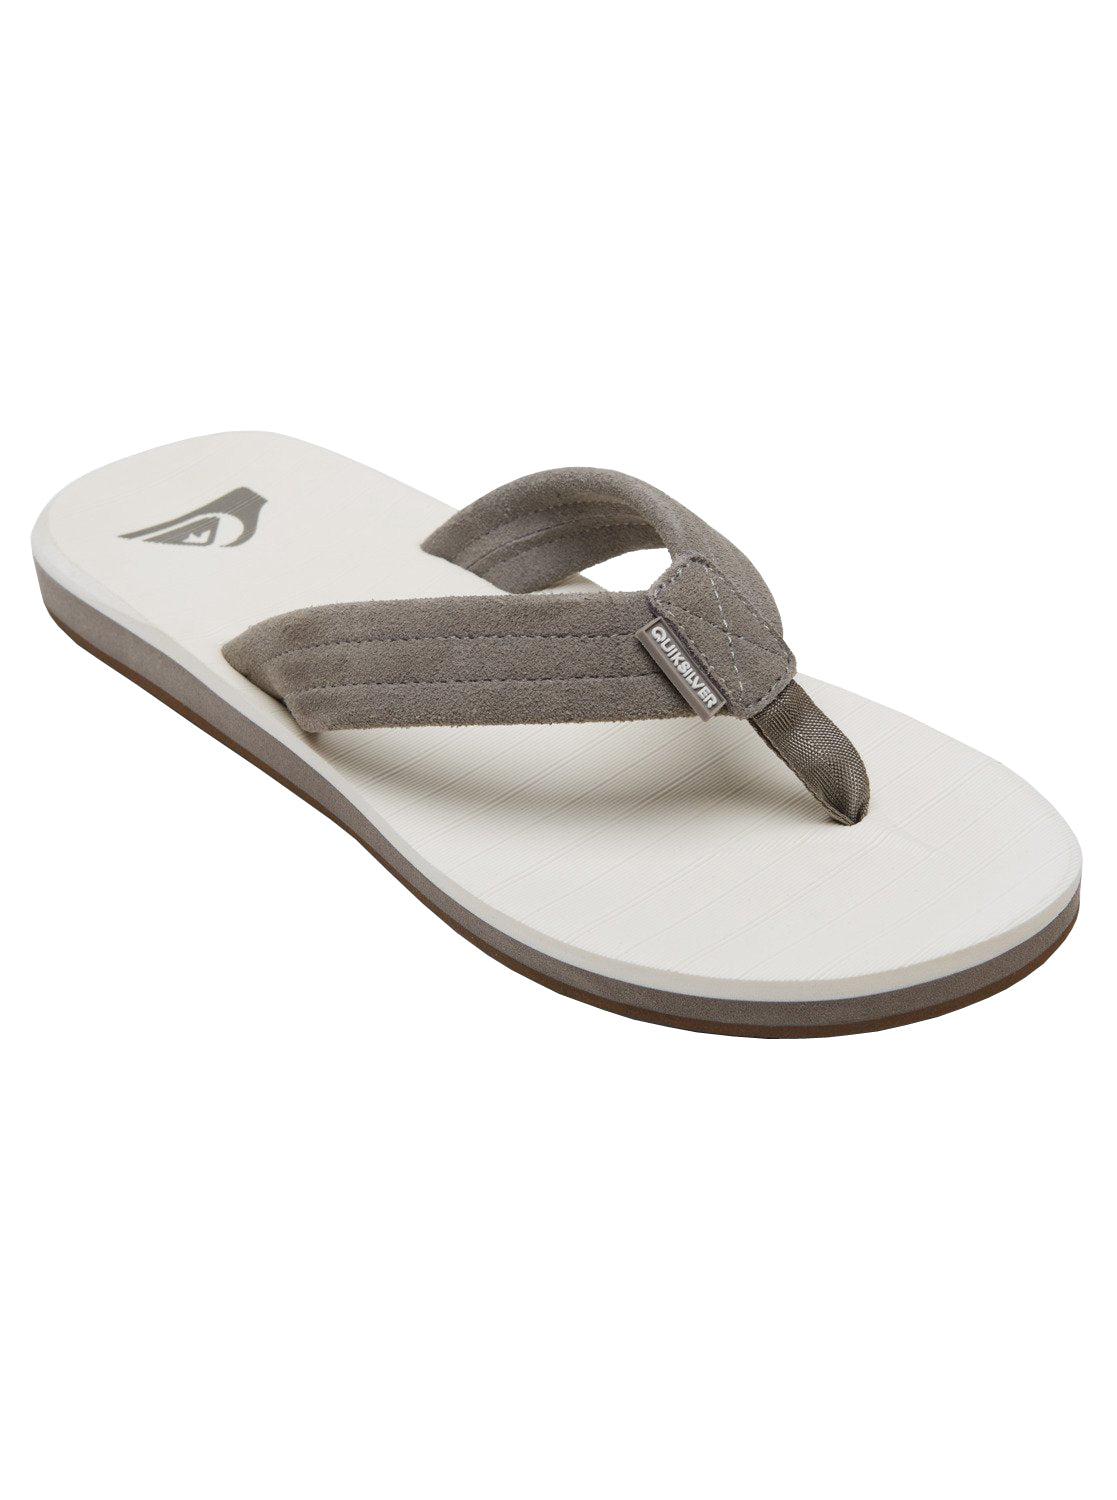 Quiksilver Carver Suede Mens Sandal XSWS-Grey-White-Grey 8